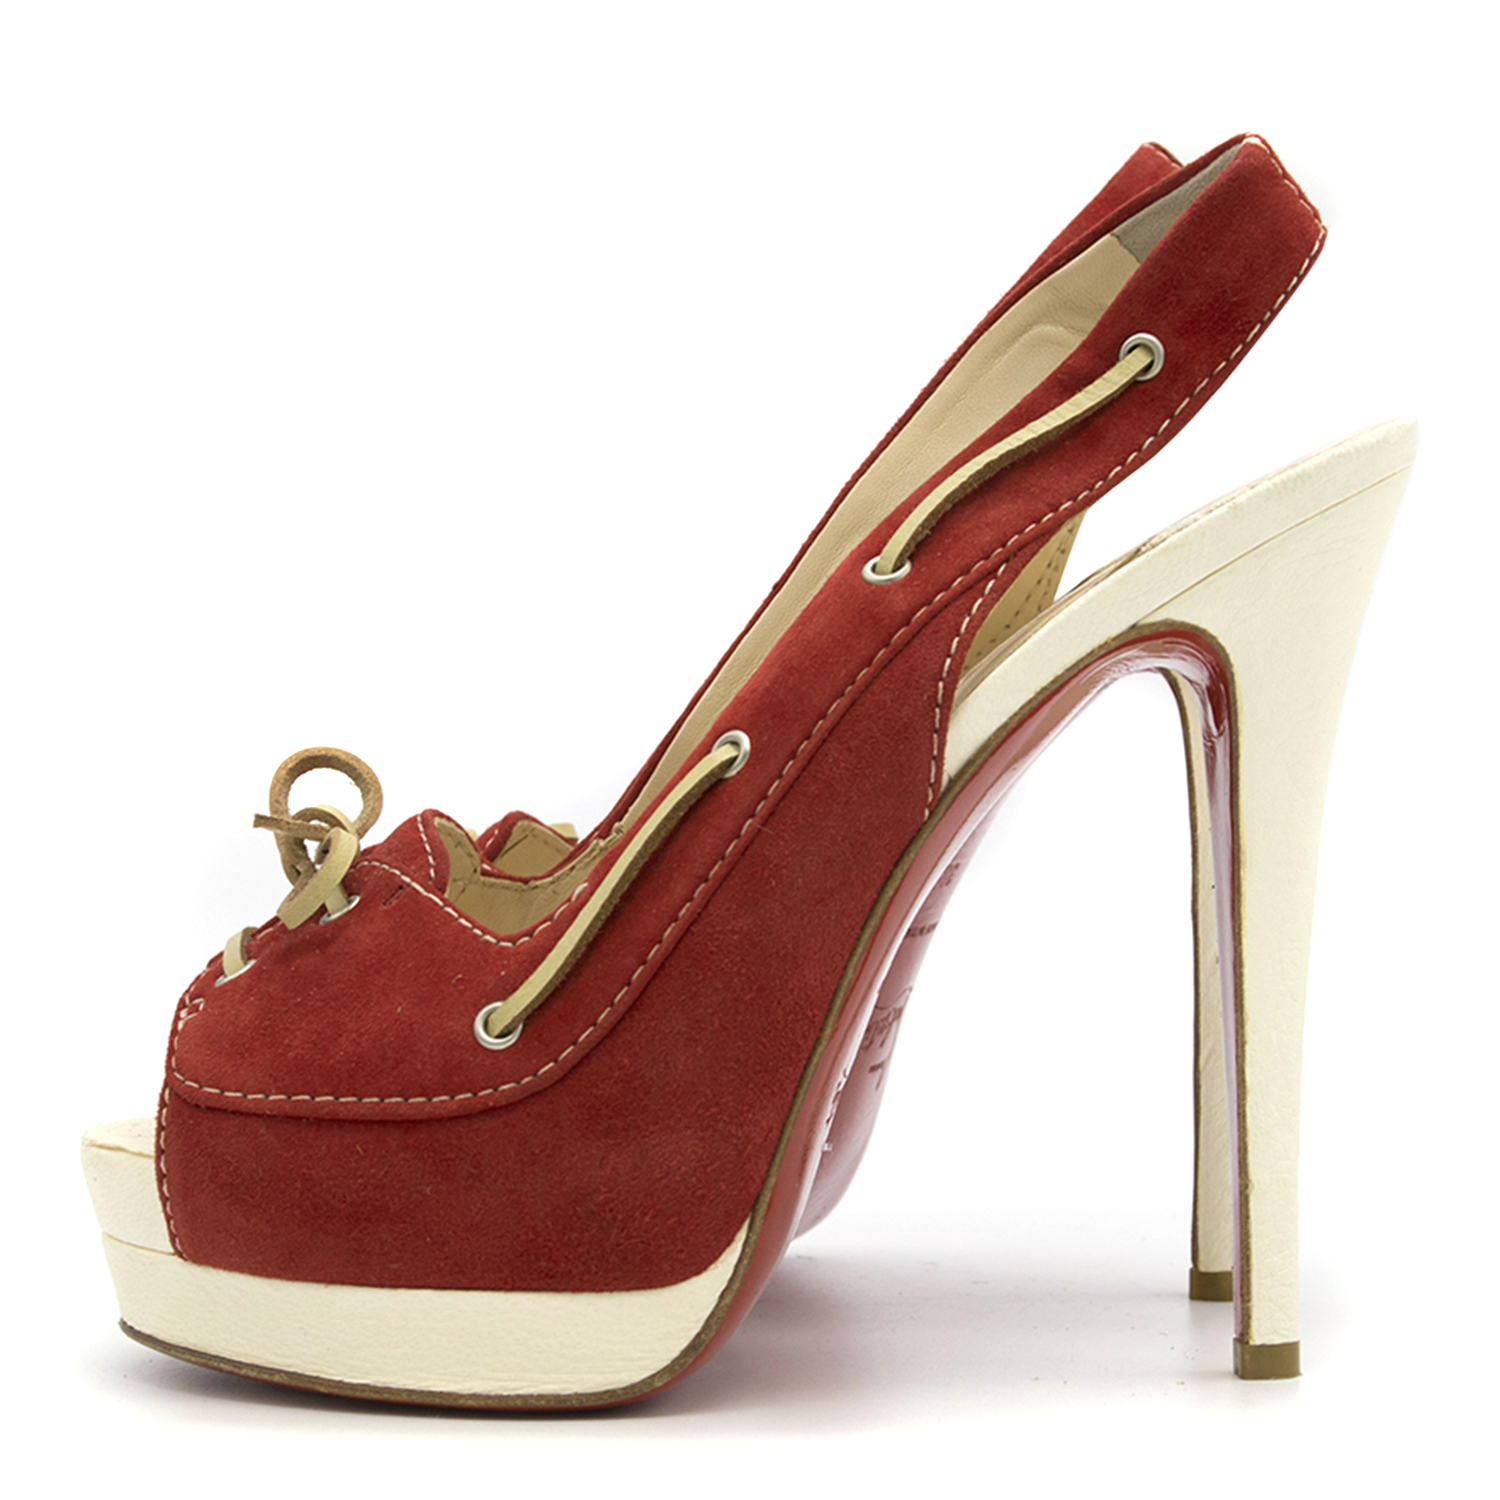 Christian Louboutin Red And Cream Platform Heels | HEWI